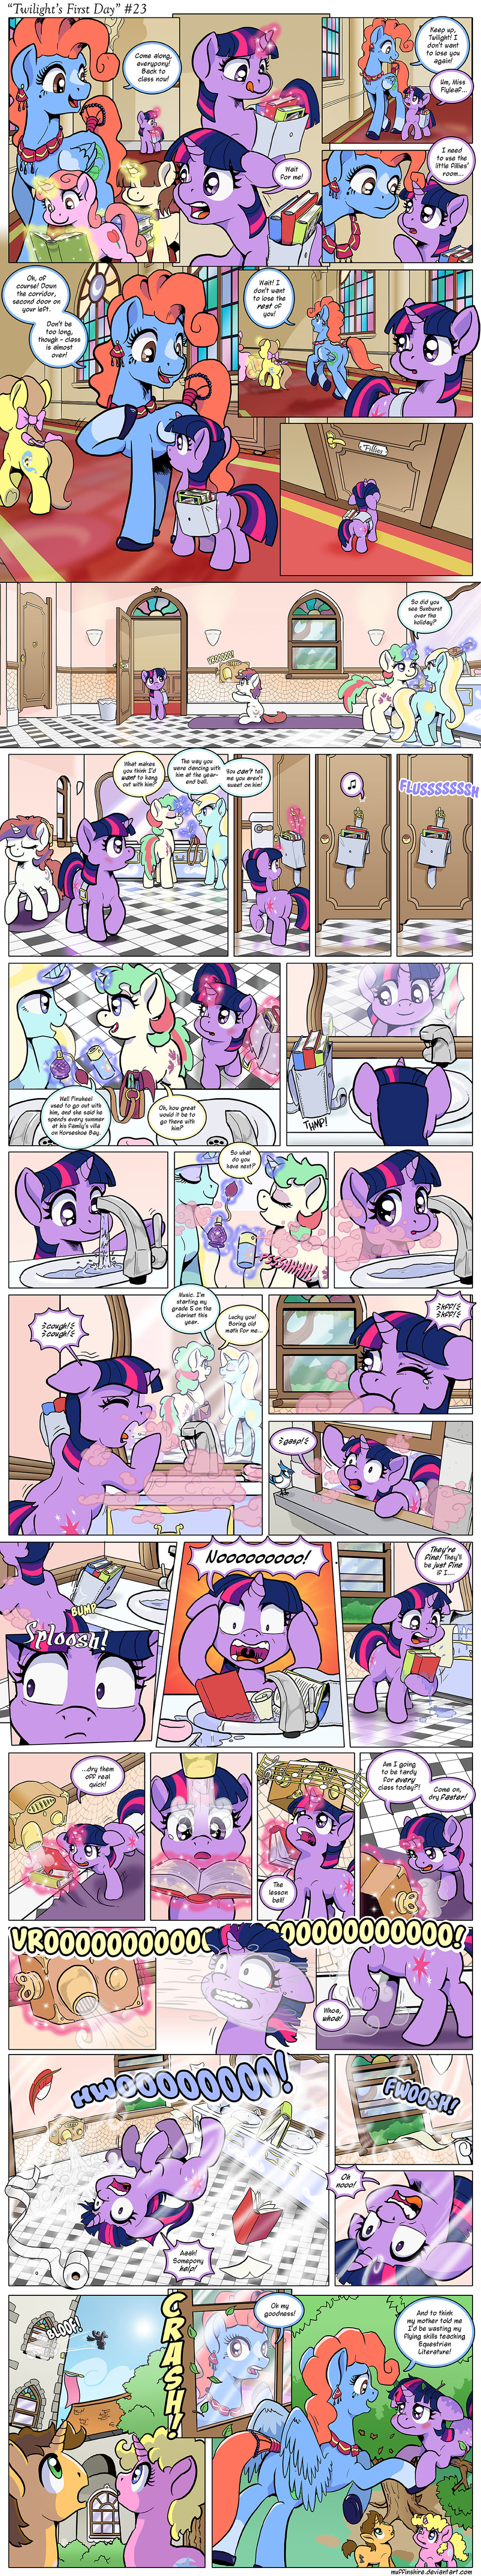 Comic - Twilight's First Day #23